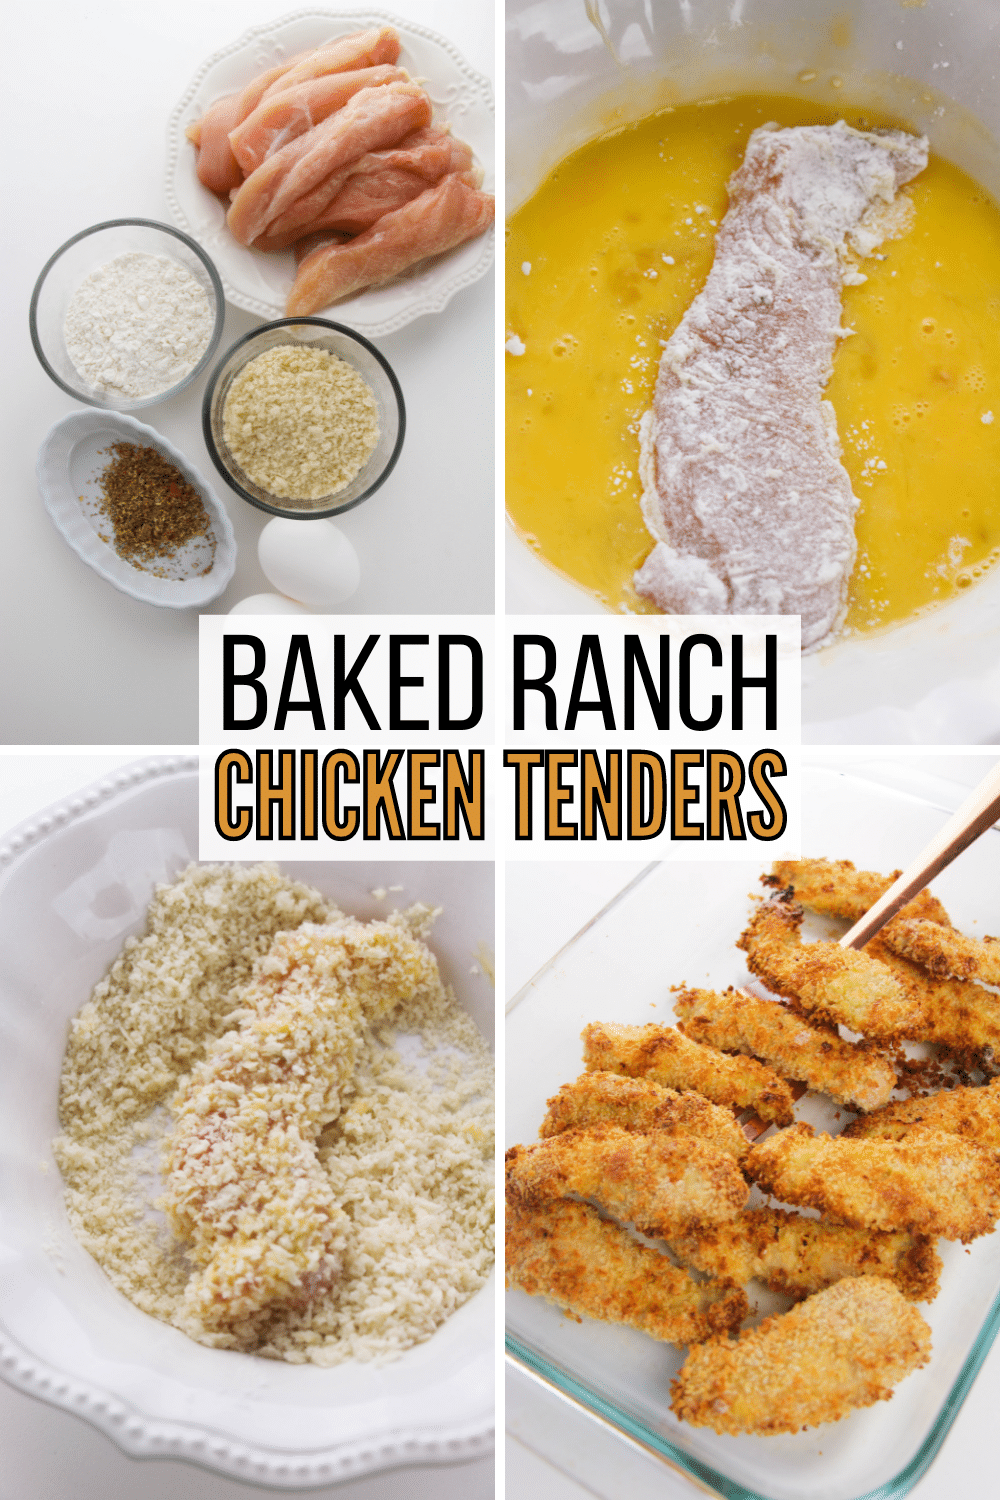 Baked Ranch Chicken Tenders are crispy, tangy and delicious, perfect for a family meal! They're simple to make and can be made gluten free. #chickentenders #ranch #chicken #bakedchickentenders #recipe via @wondermomwannab